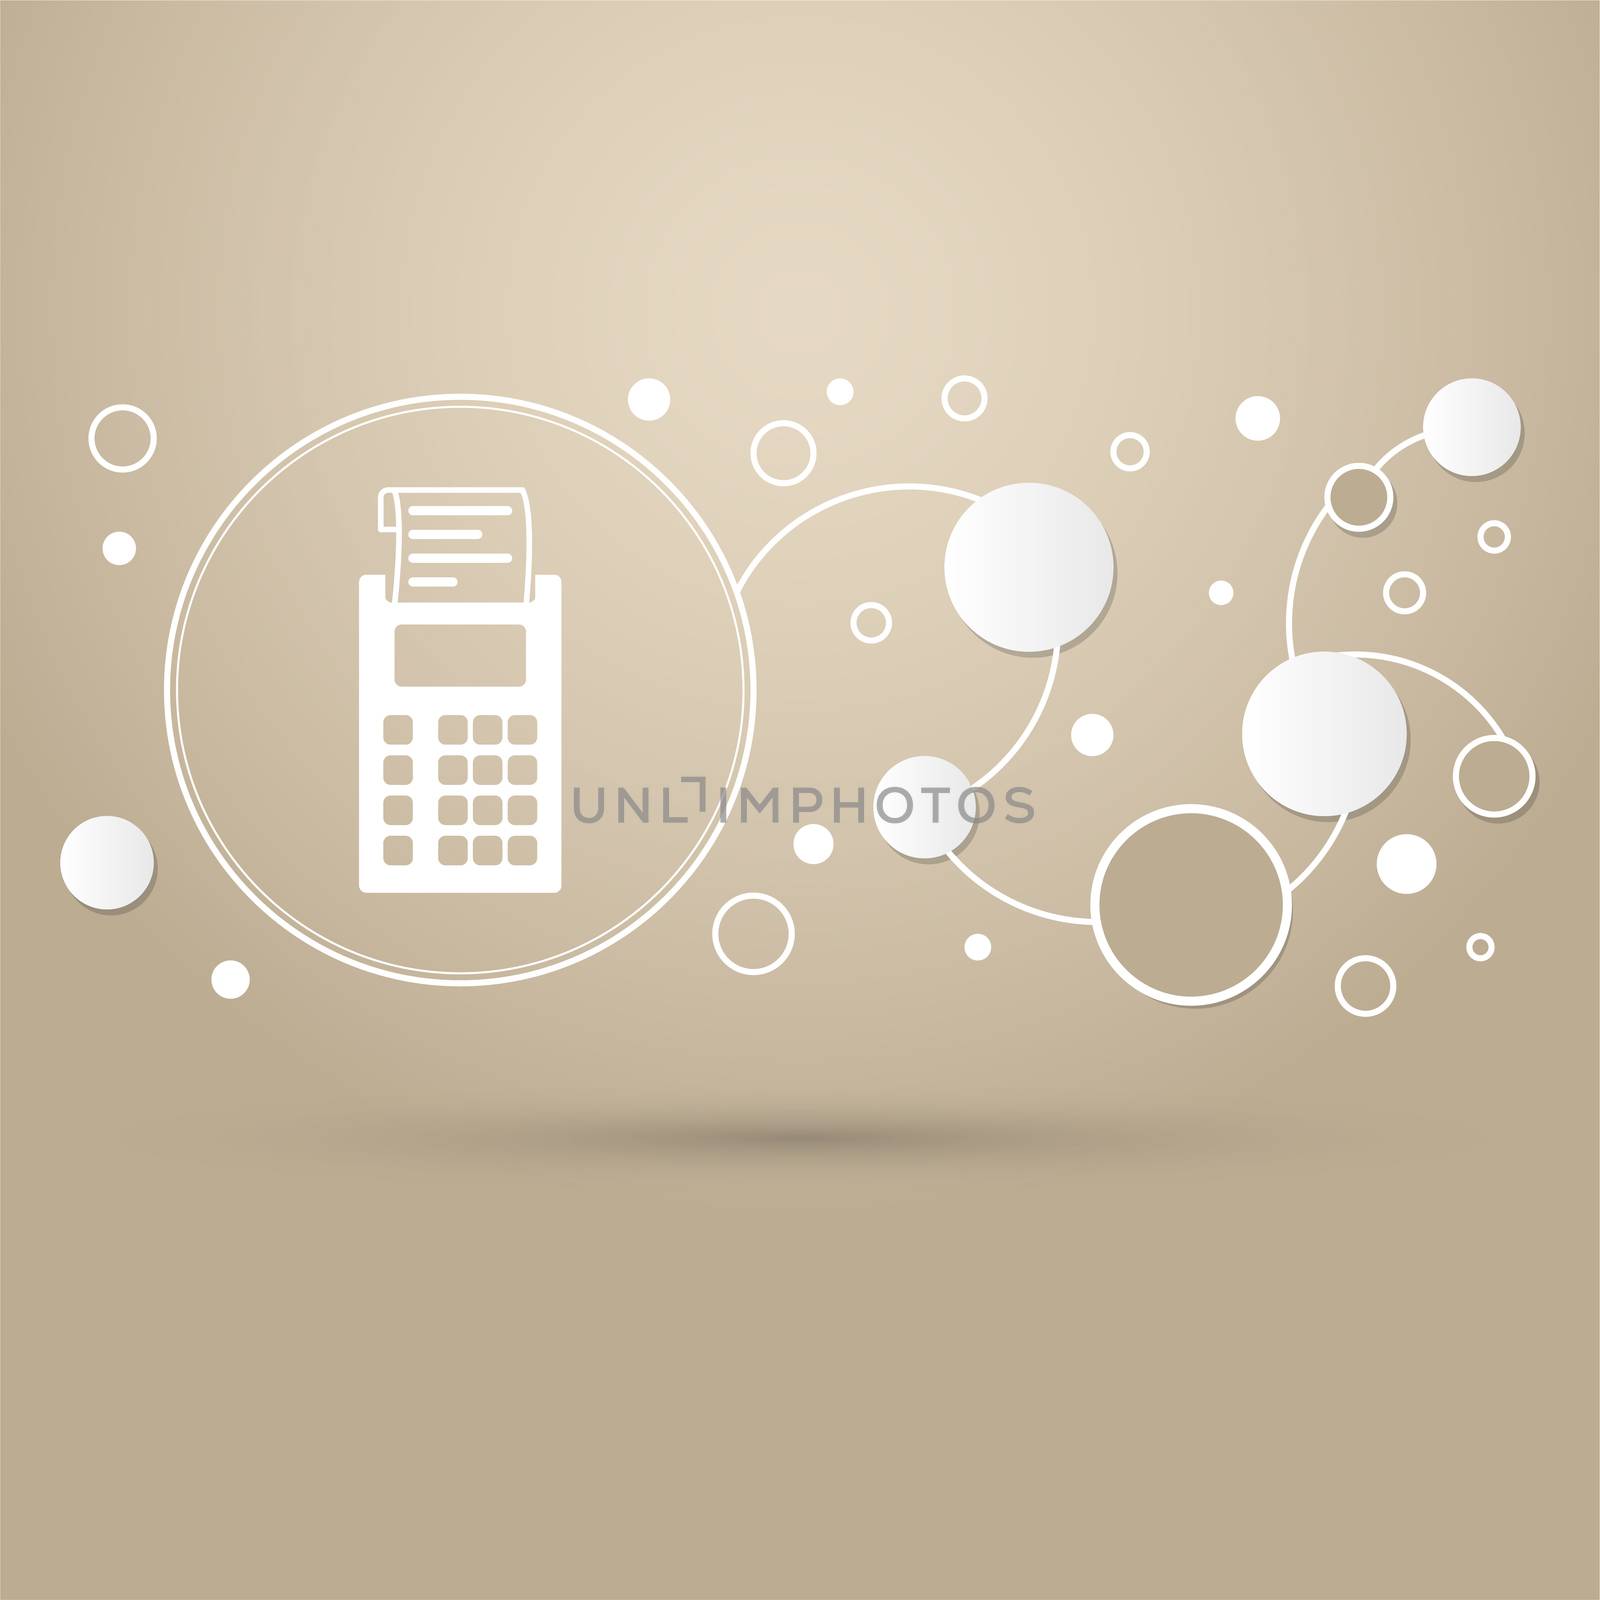 calculator icon on a brown background with elegant style and modern design infographic. illustration